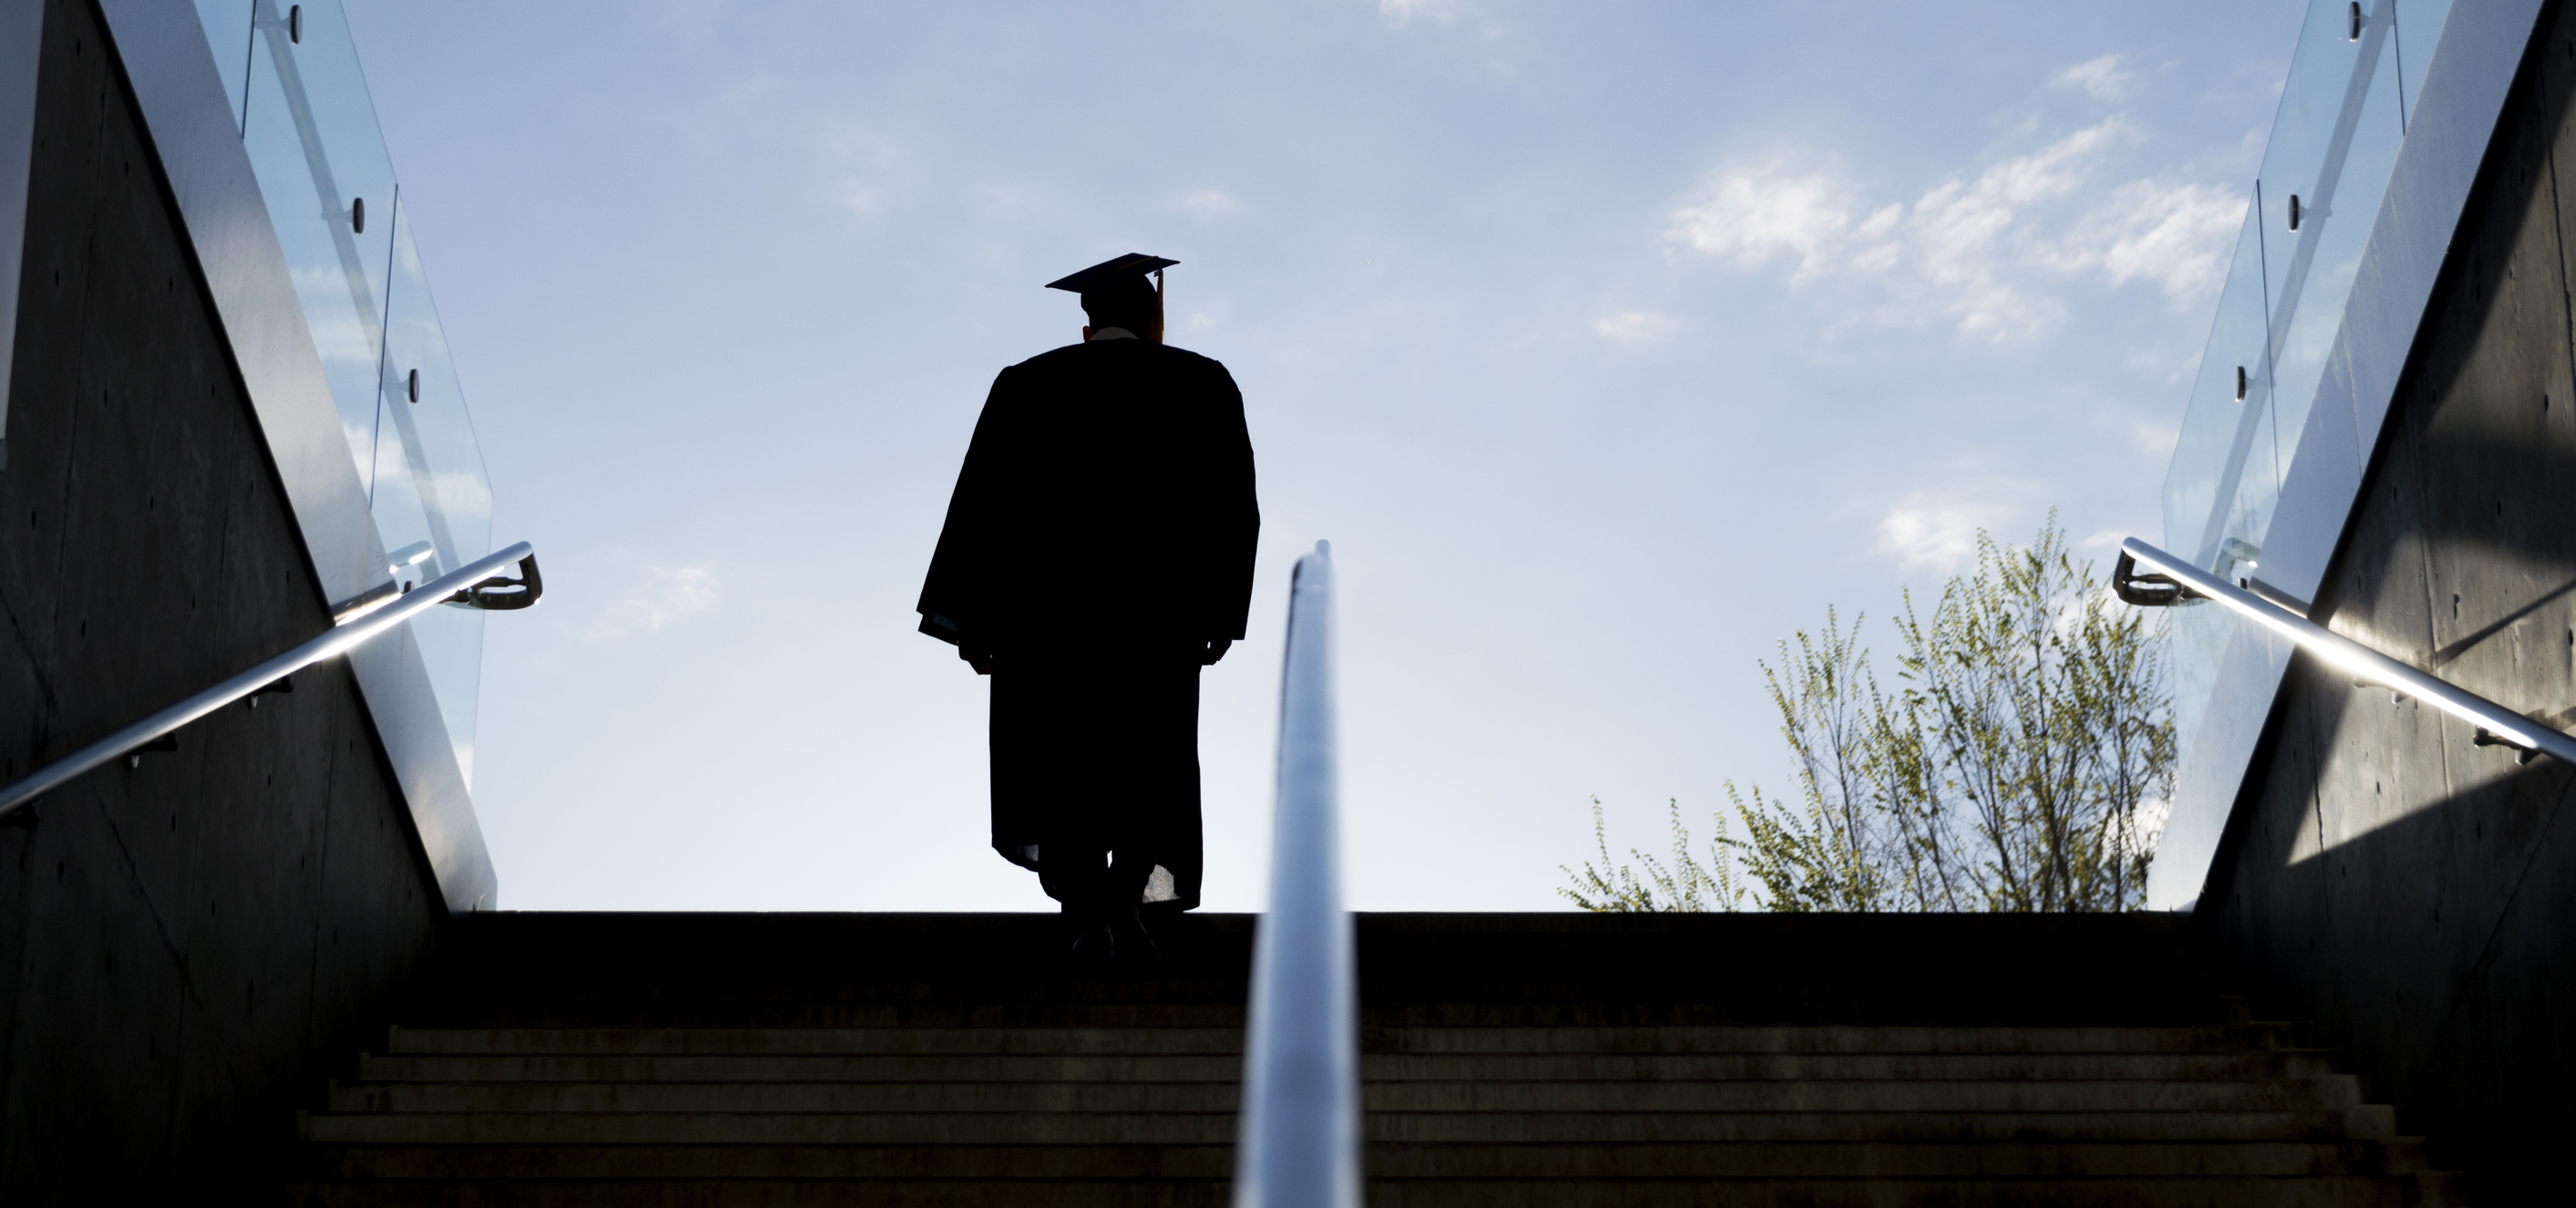 A young graduate in cap and gown cuts a silhouette in the morning sky as they ascend a staircase. 